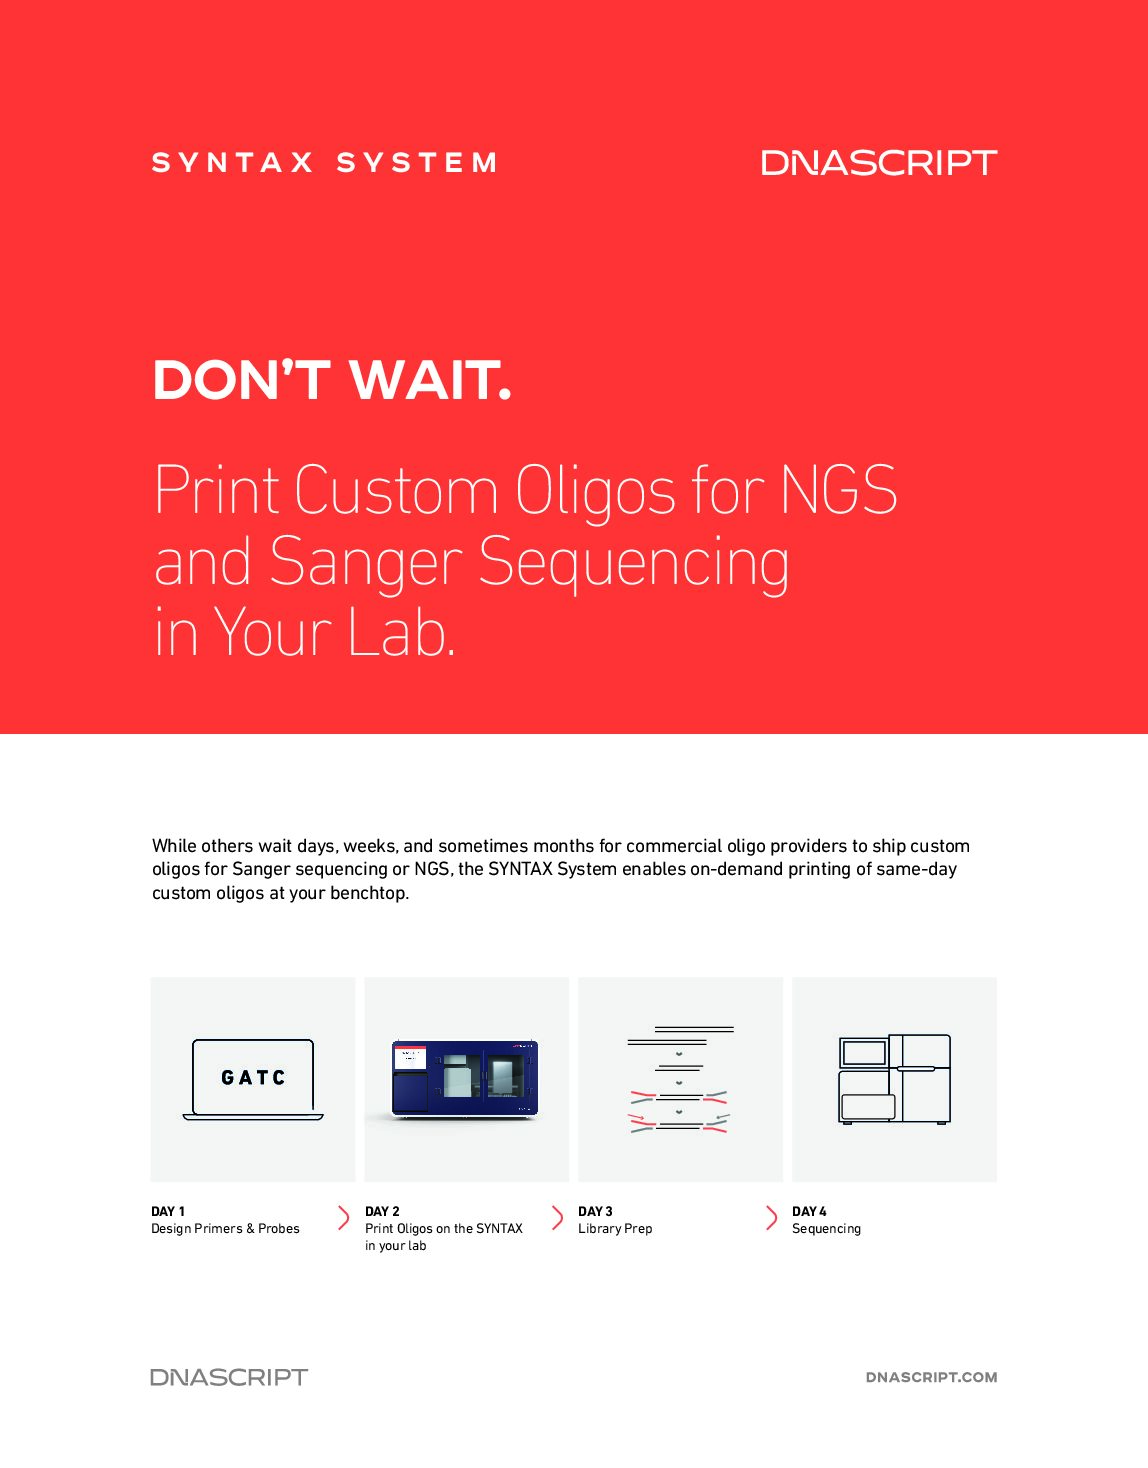 NGS and Sanger Sequencing Assay Support - On-demand Printing of Same-day Oligos